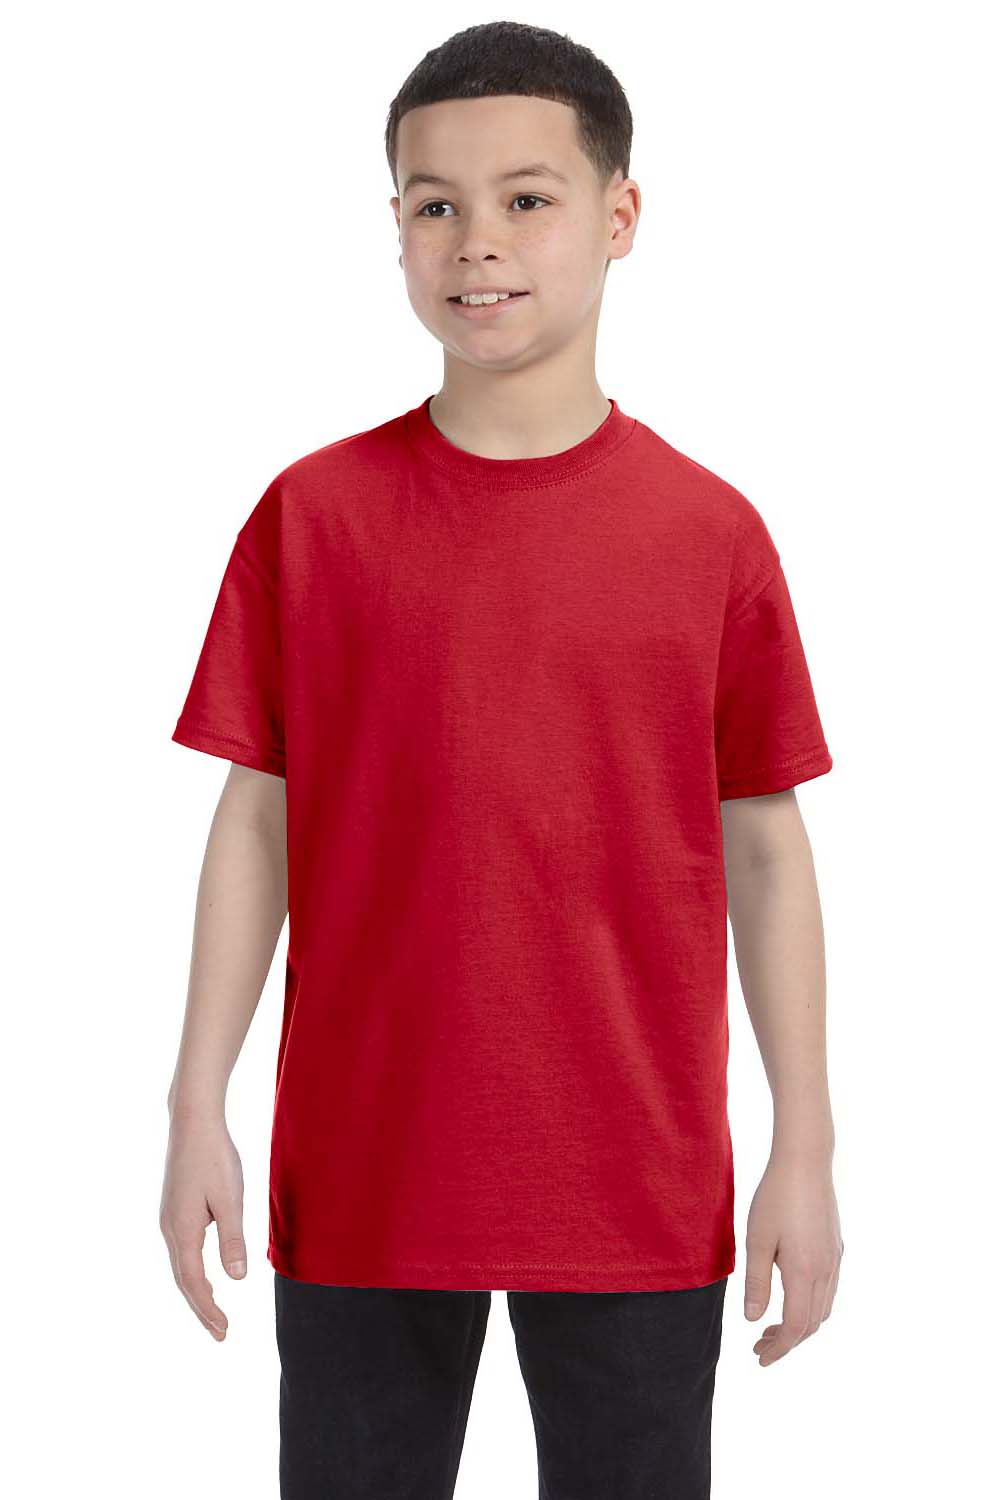 Hanes 54500 Youth ComfortSoft Short Sleeve Crewneck T-Shirt Red Front